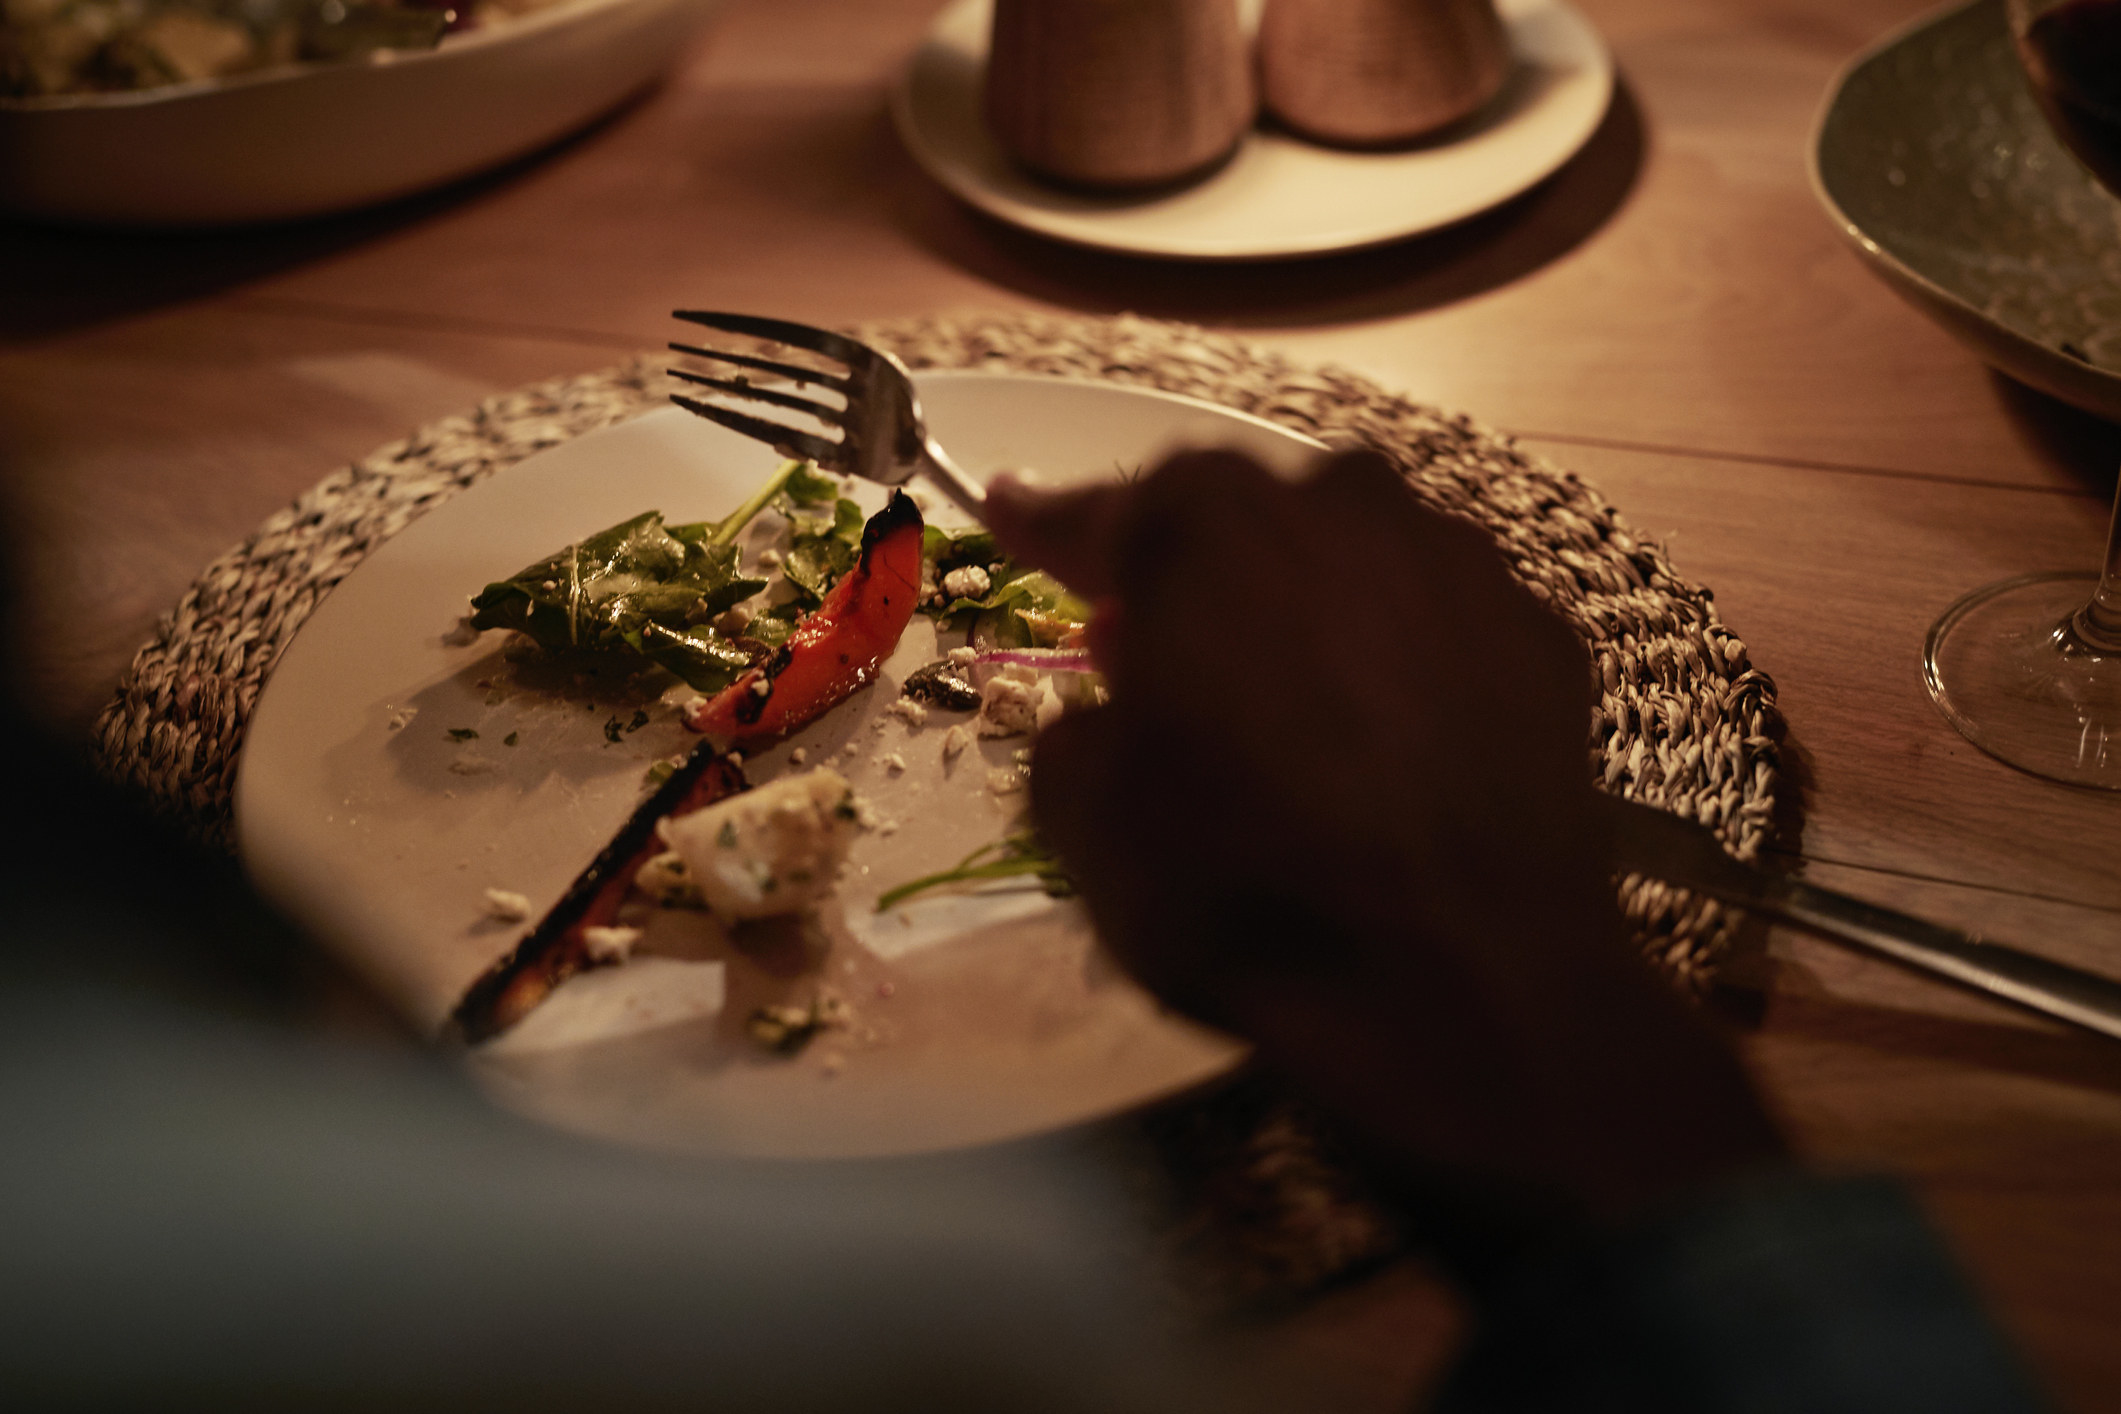 A person holding a fork over a plate of food.